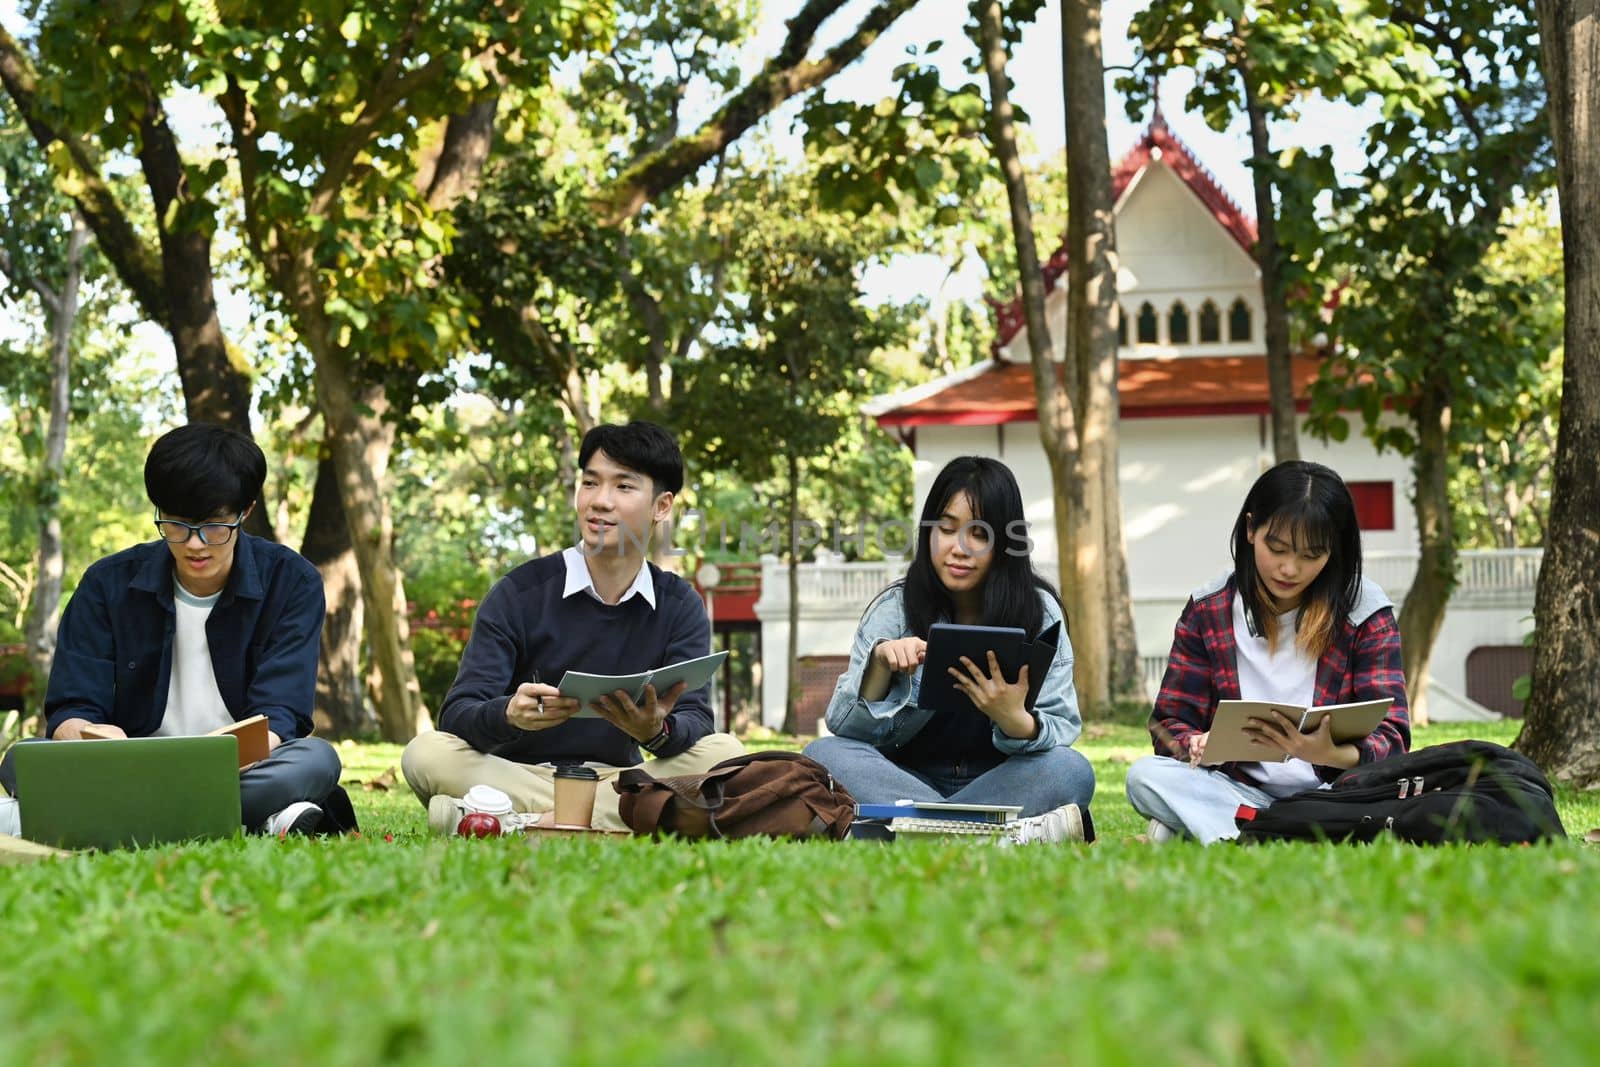 Group of students doing group project and reading book together in university campus. Education and youth lifestyle concept by prathanchorruangsak